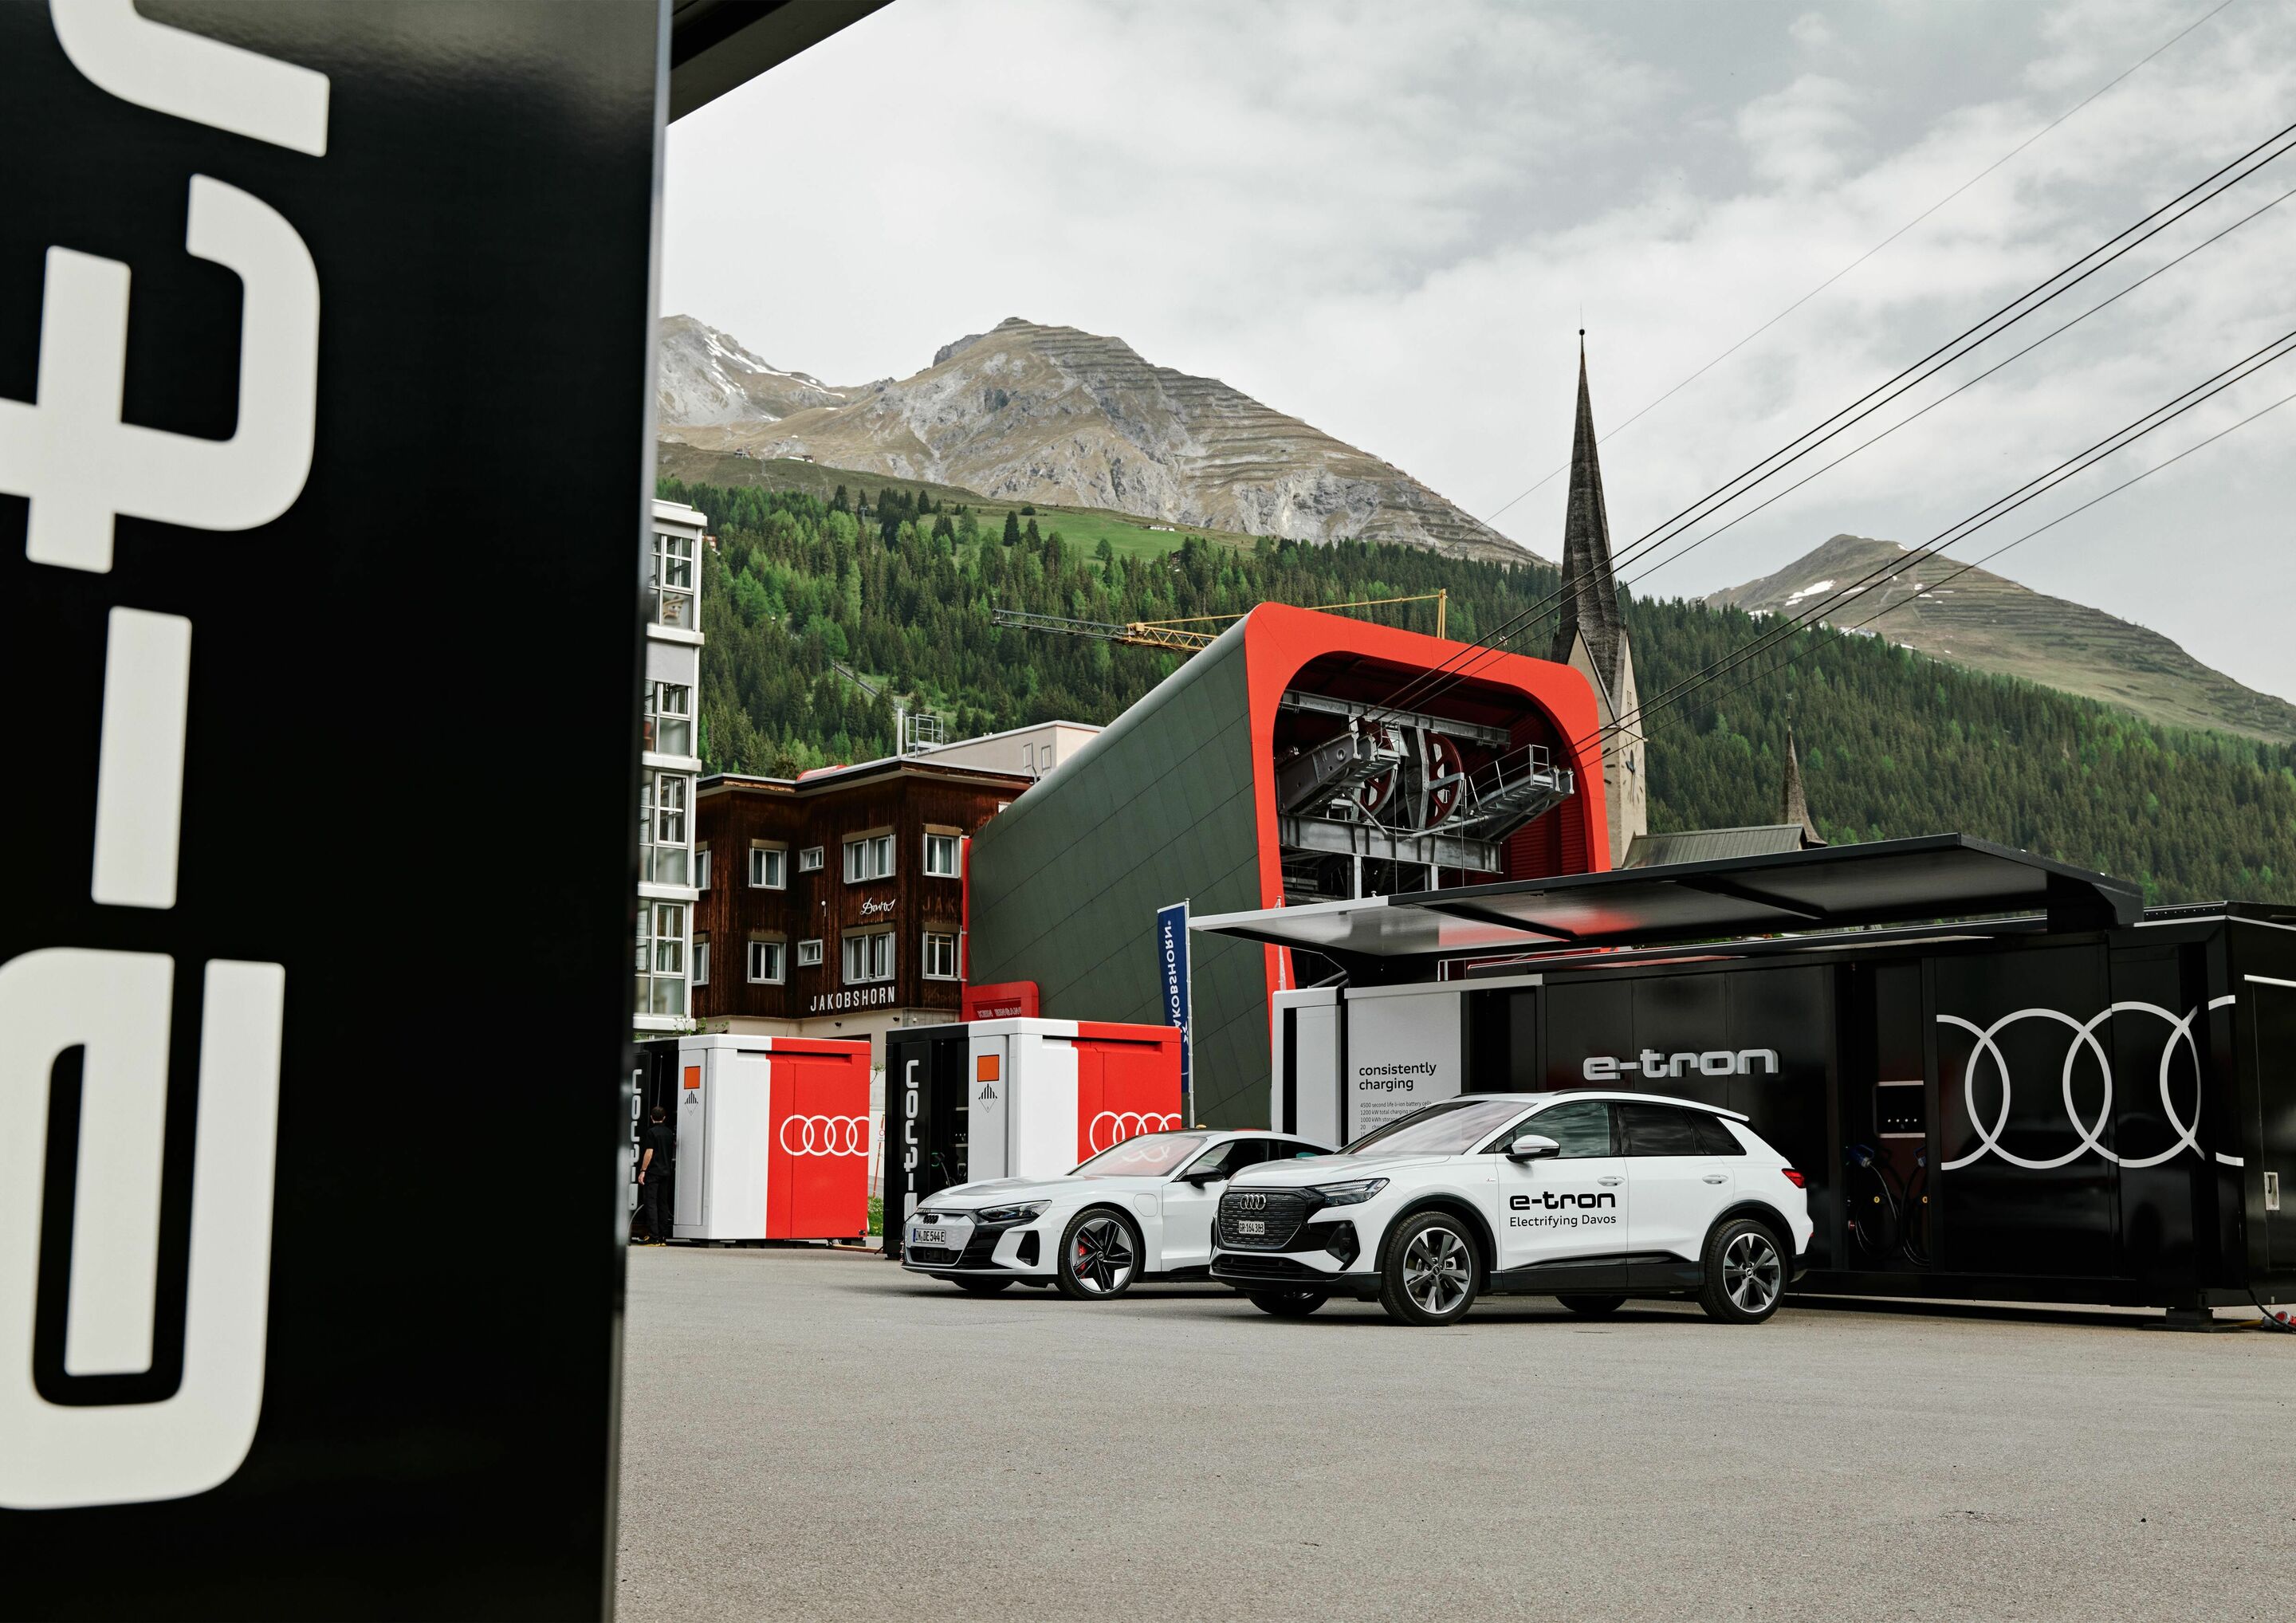 World Economic Forum in Davos: sustainable mobility in a picturesque mountain setting